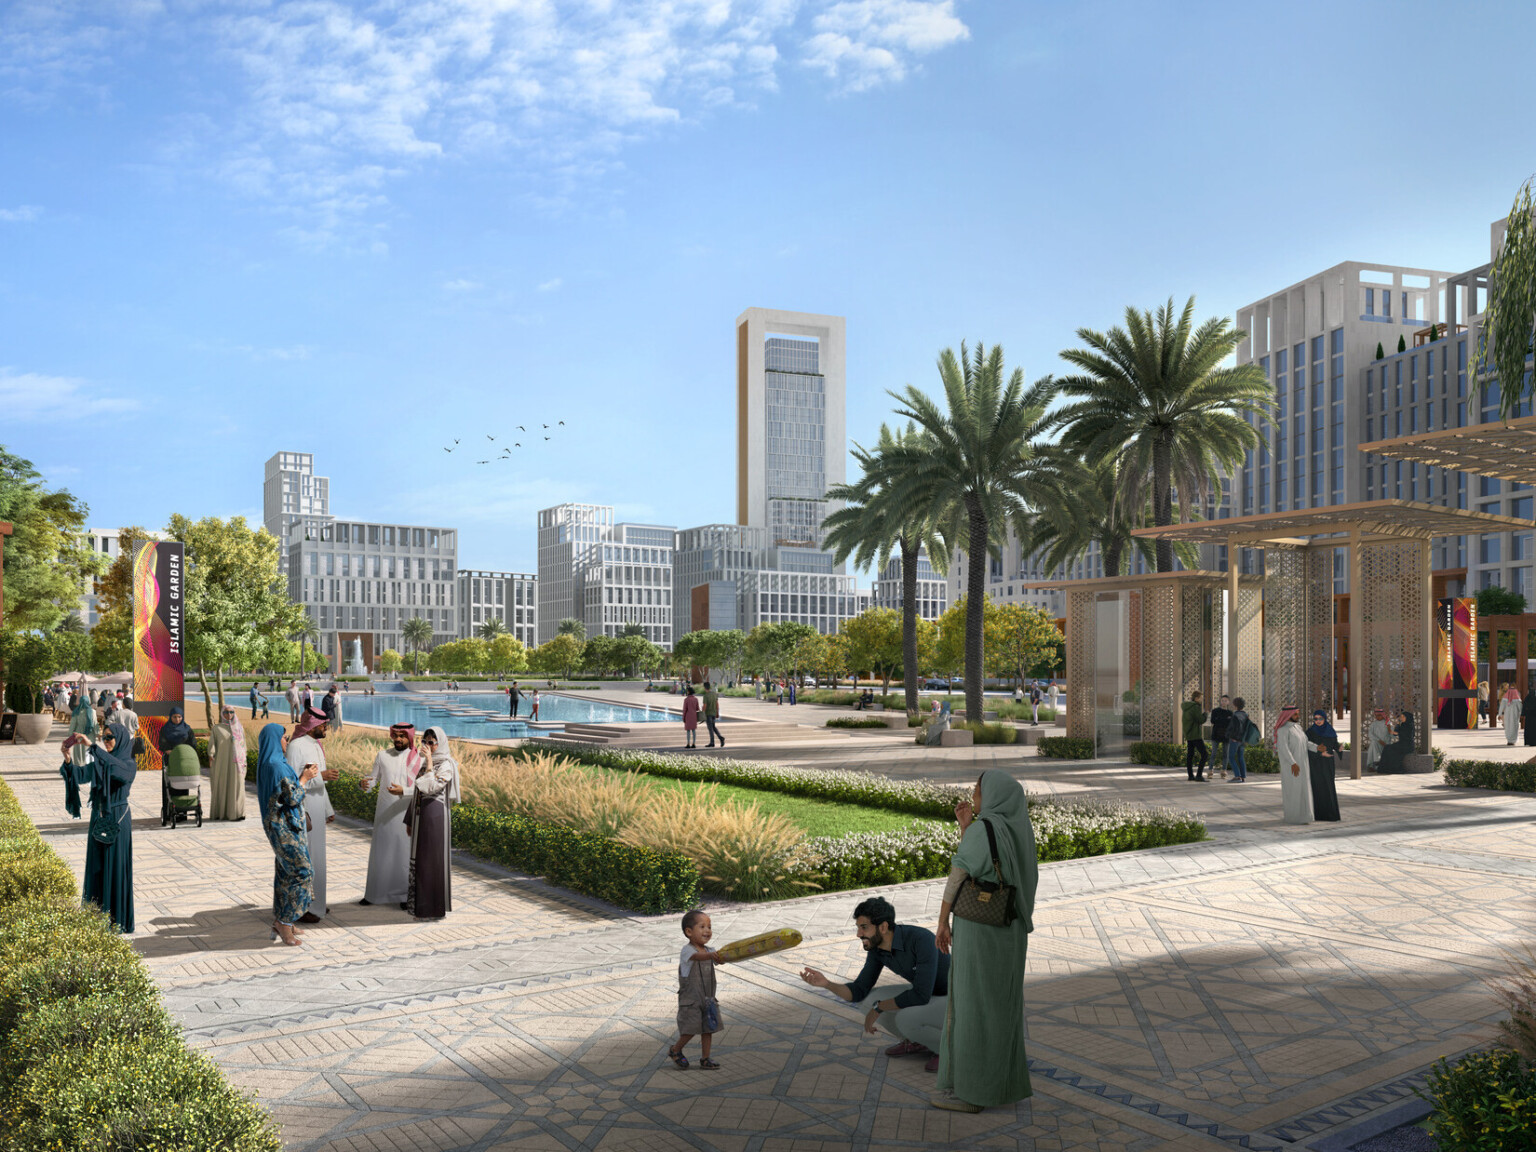 An urban city center with people strolling, sitting at outdoor cafes, and children playing, surrounded by contemporary buildings and lush greenery, exemplifying the blend of traditional Hijazi architecture with modern design